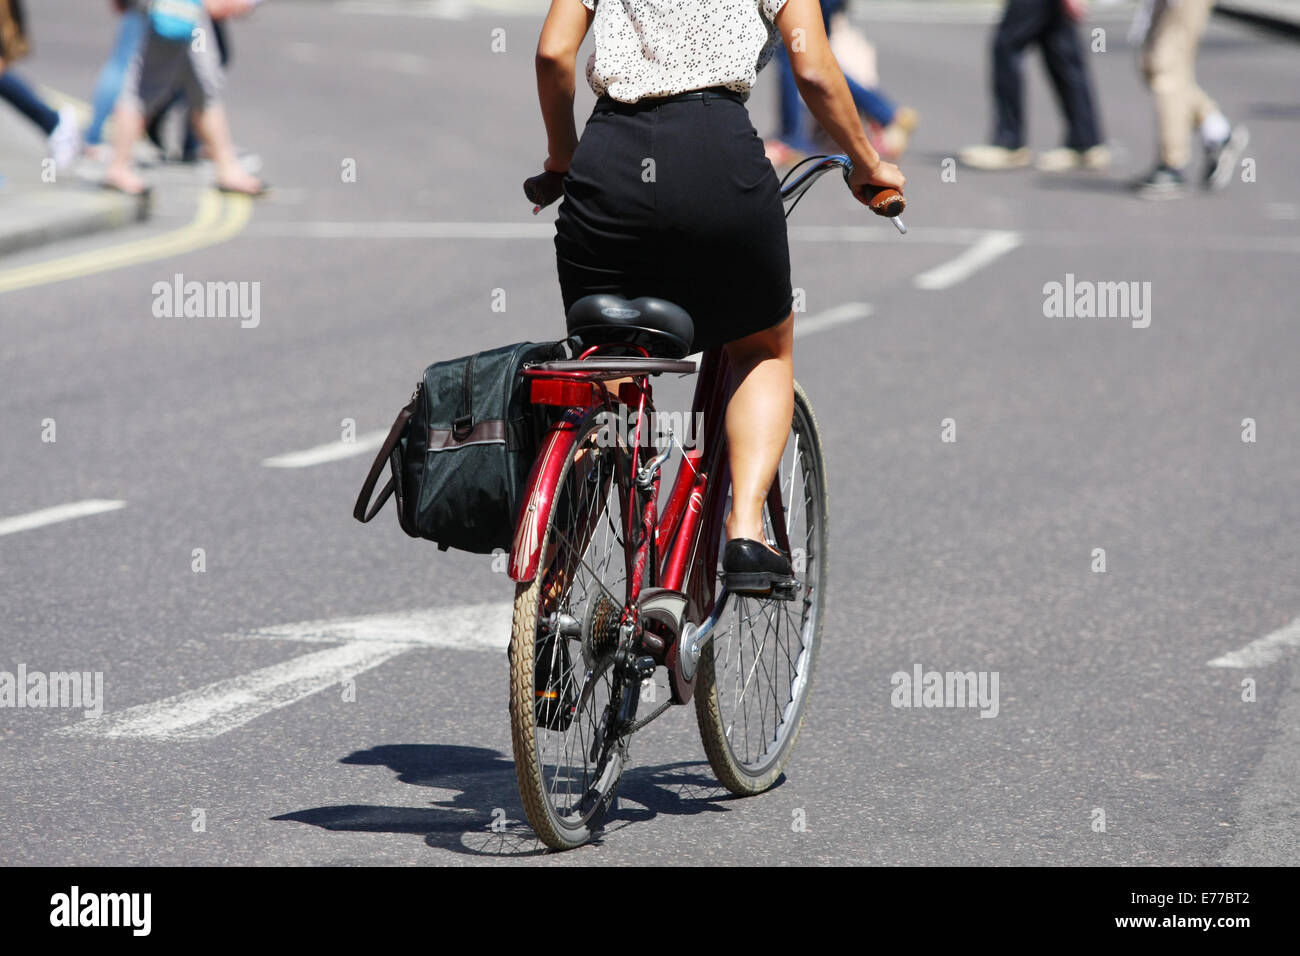 Rear view of a female riding a cycle in London. Pedestrians crossing the road in the distance. Stock Photo